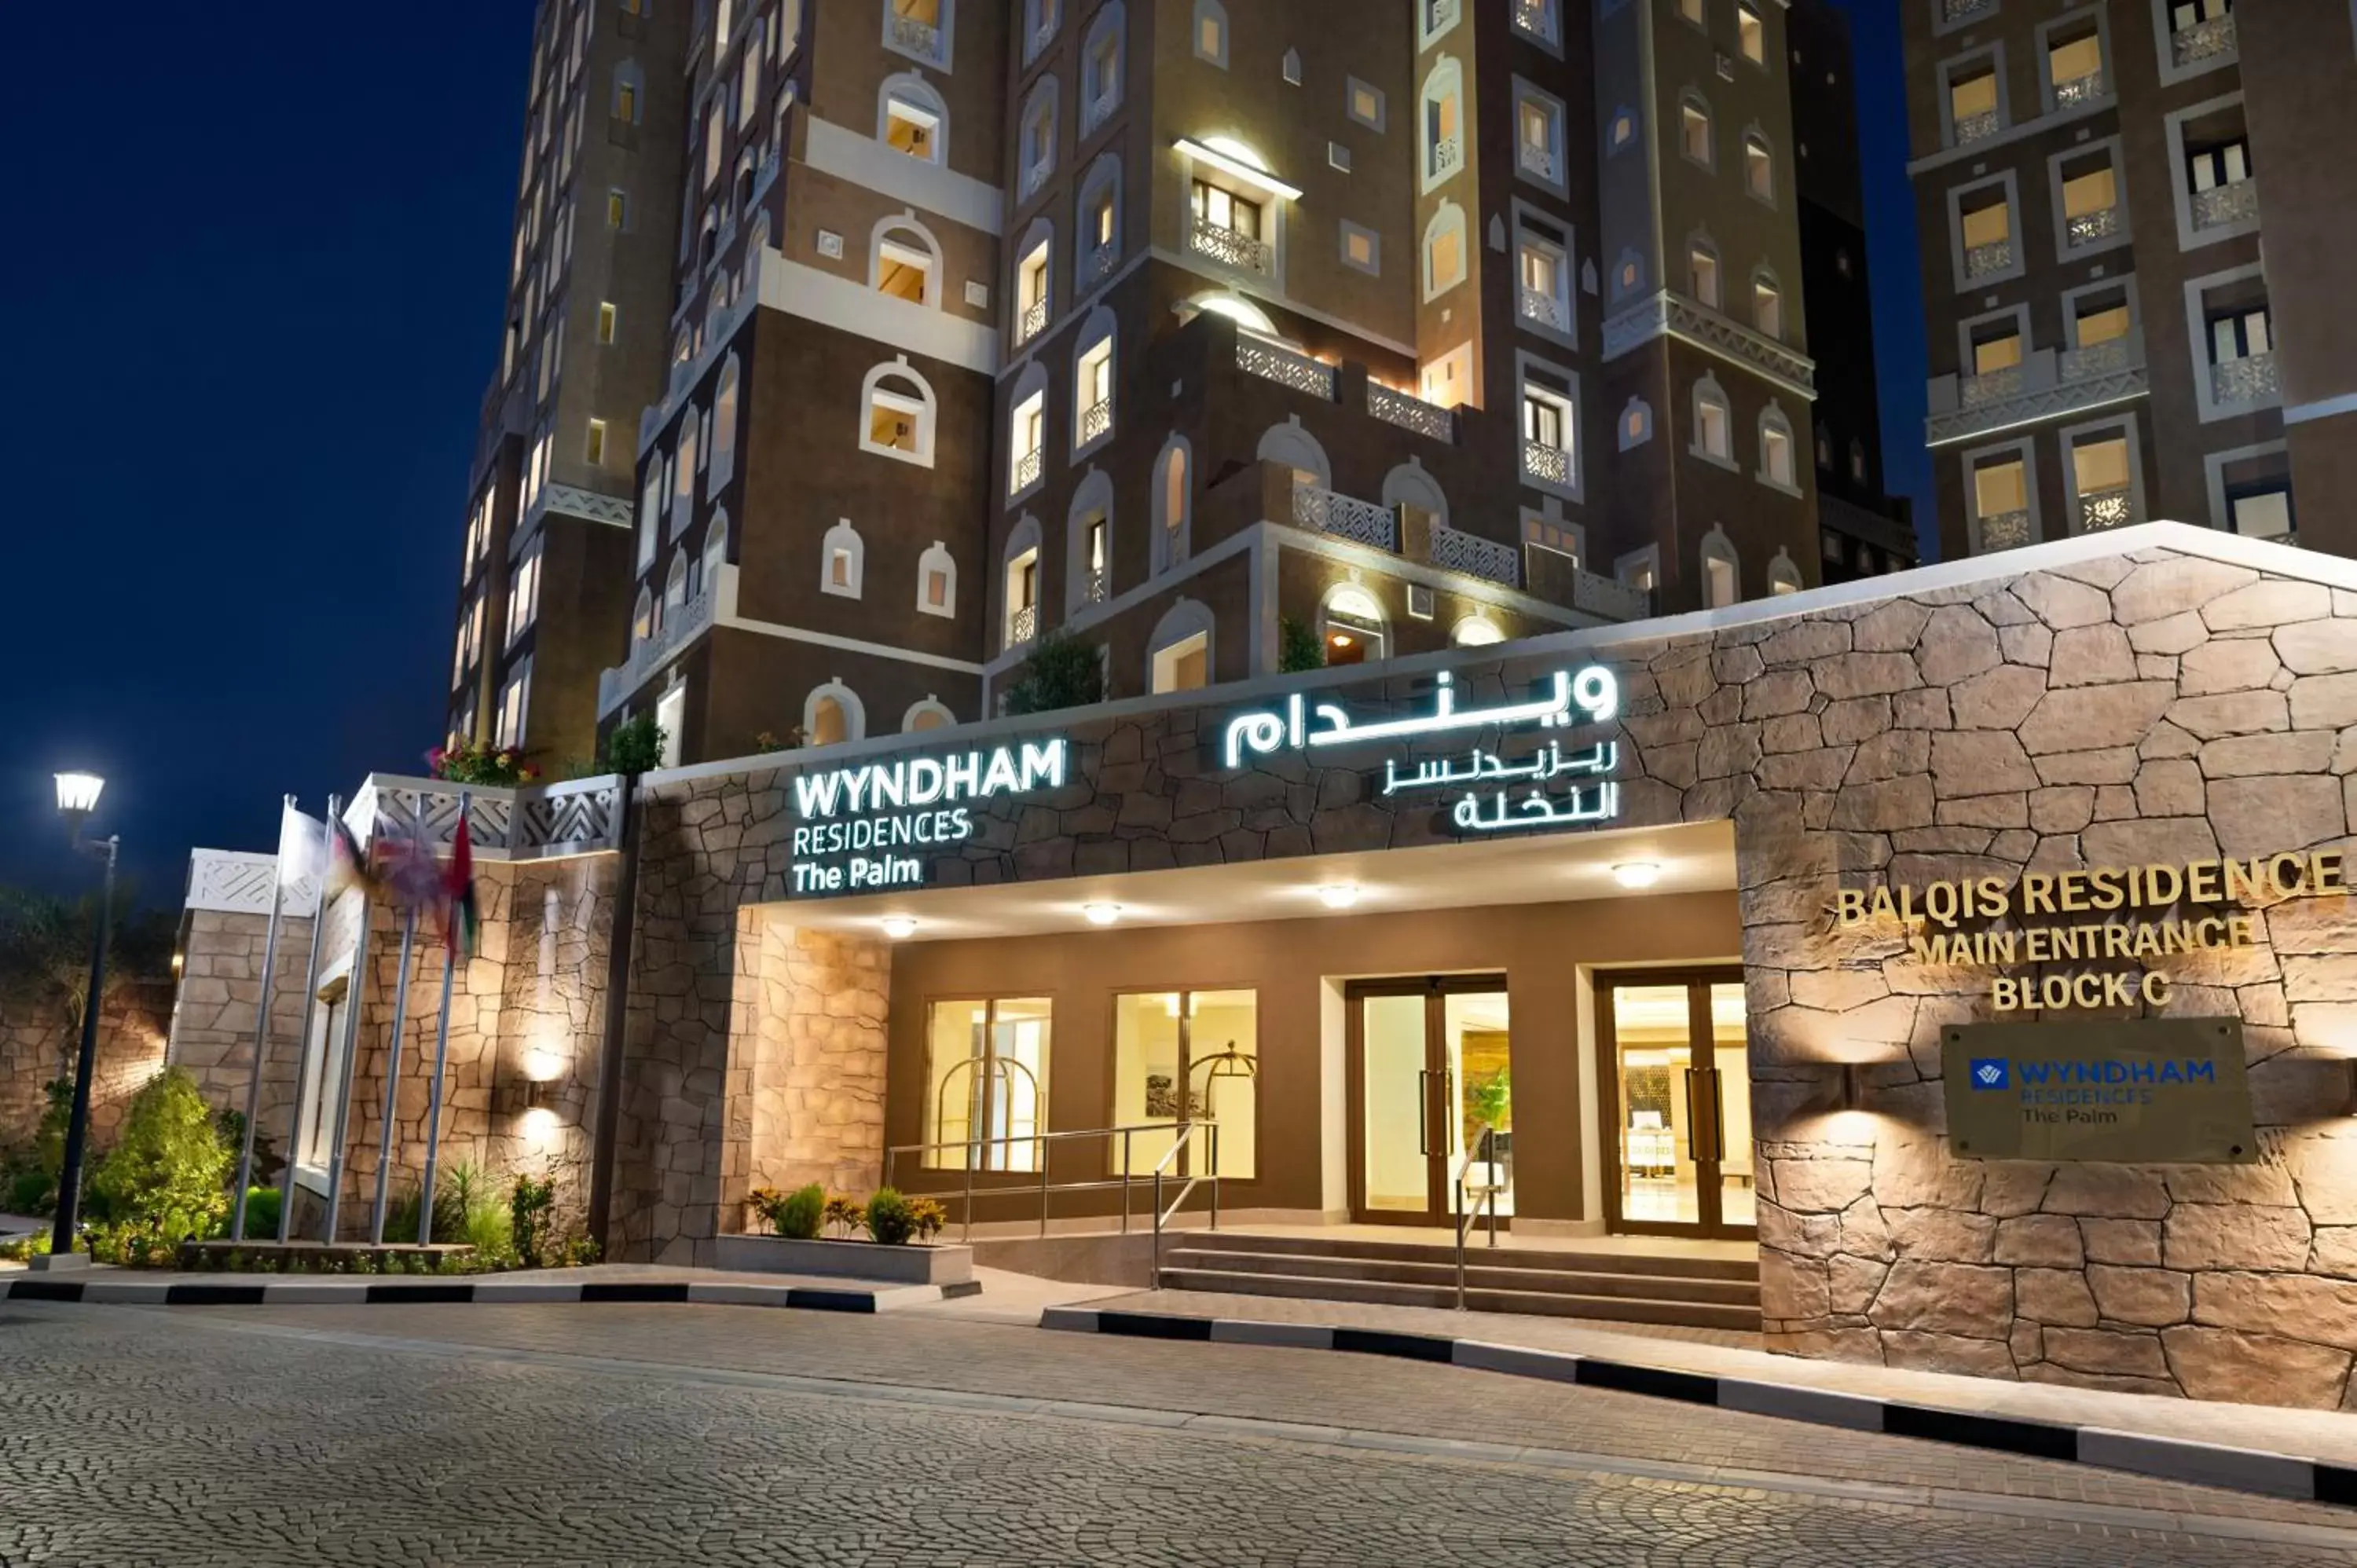 Property Building in Wyndham Residences The Palm